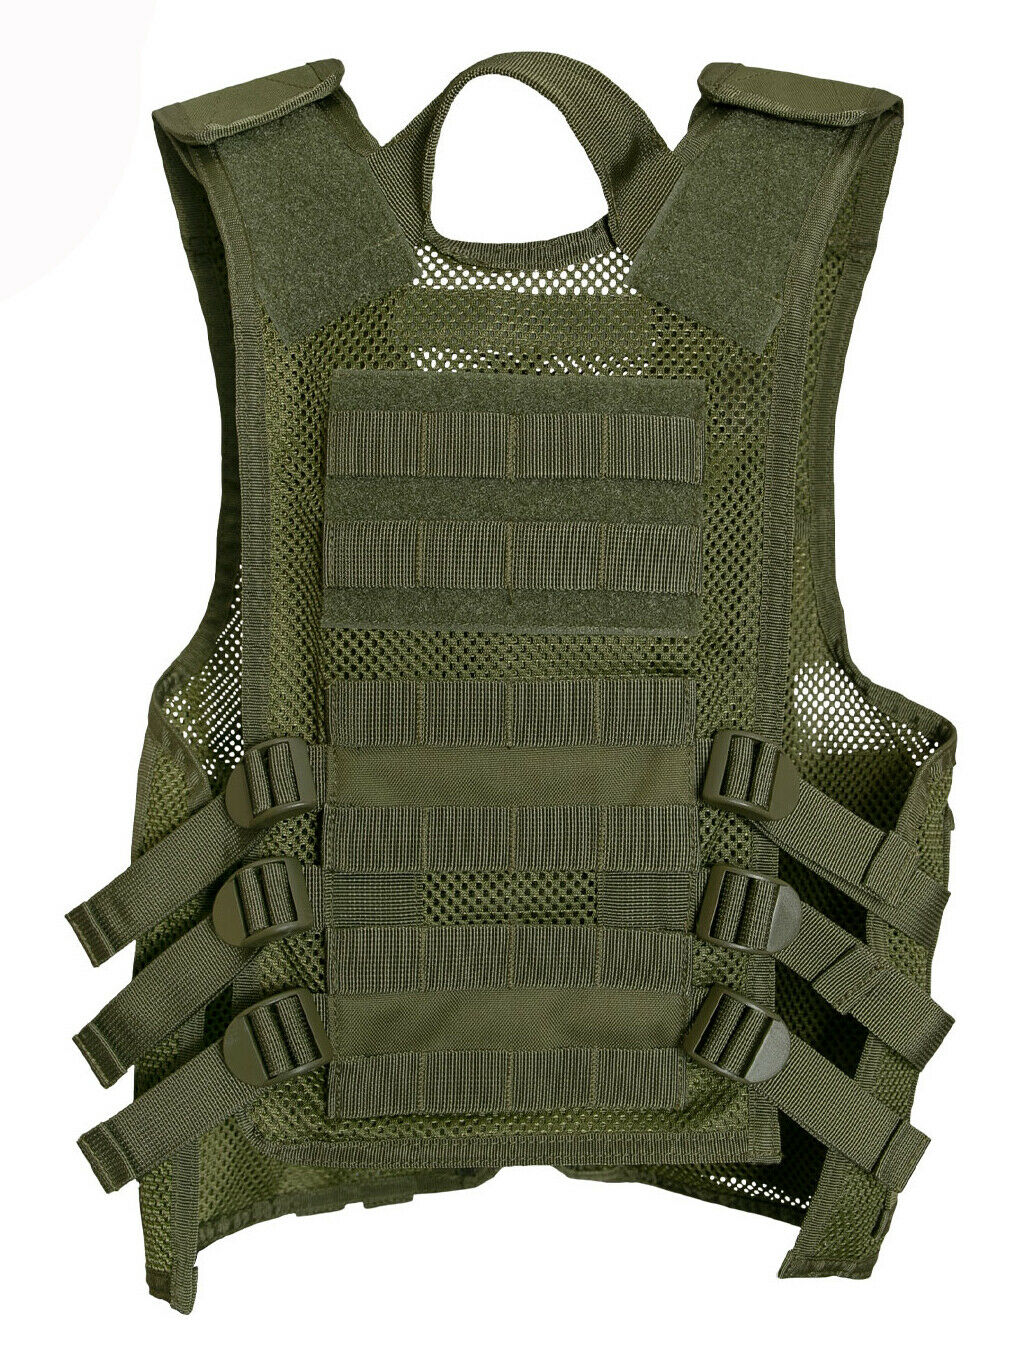 Rothco Kid's Tactical Cross Draw Vest - Olive Drab